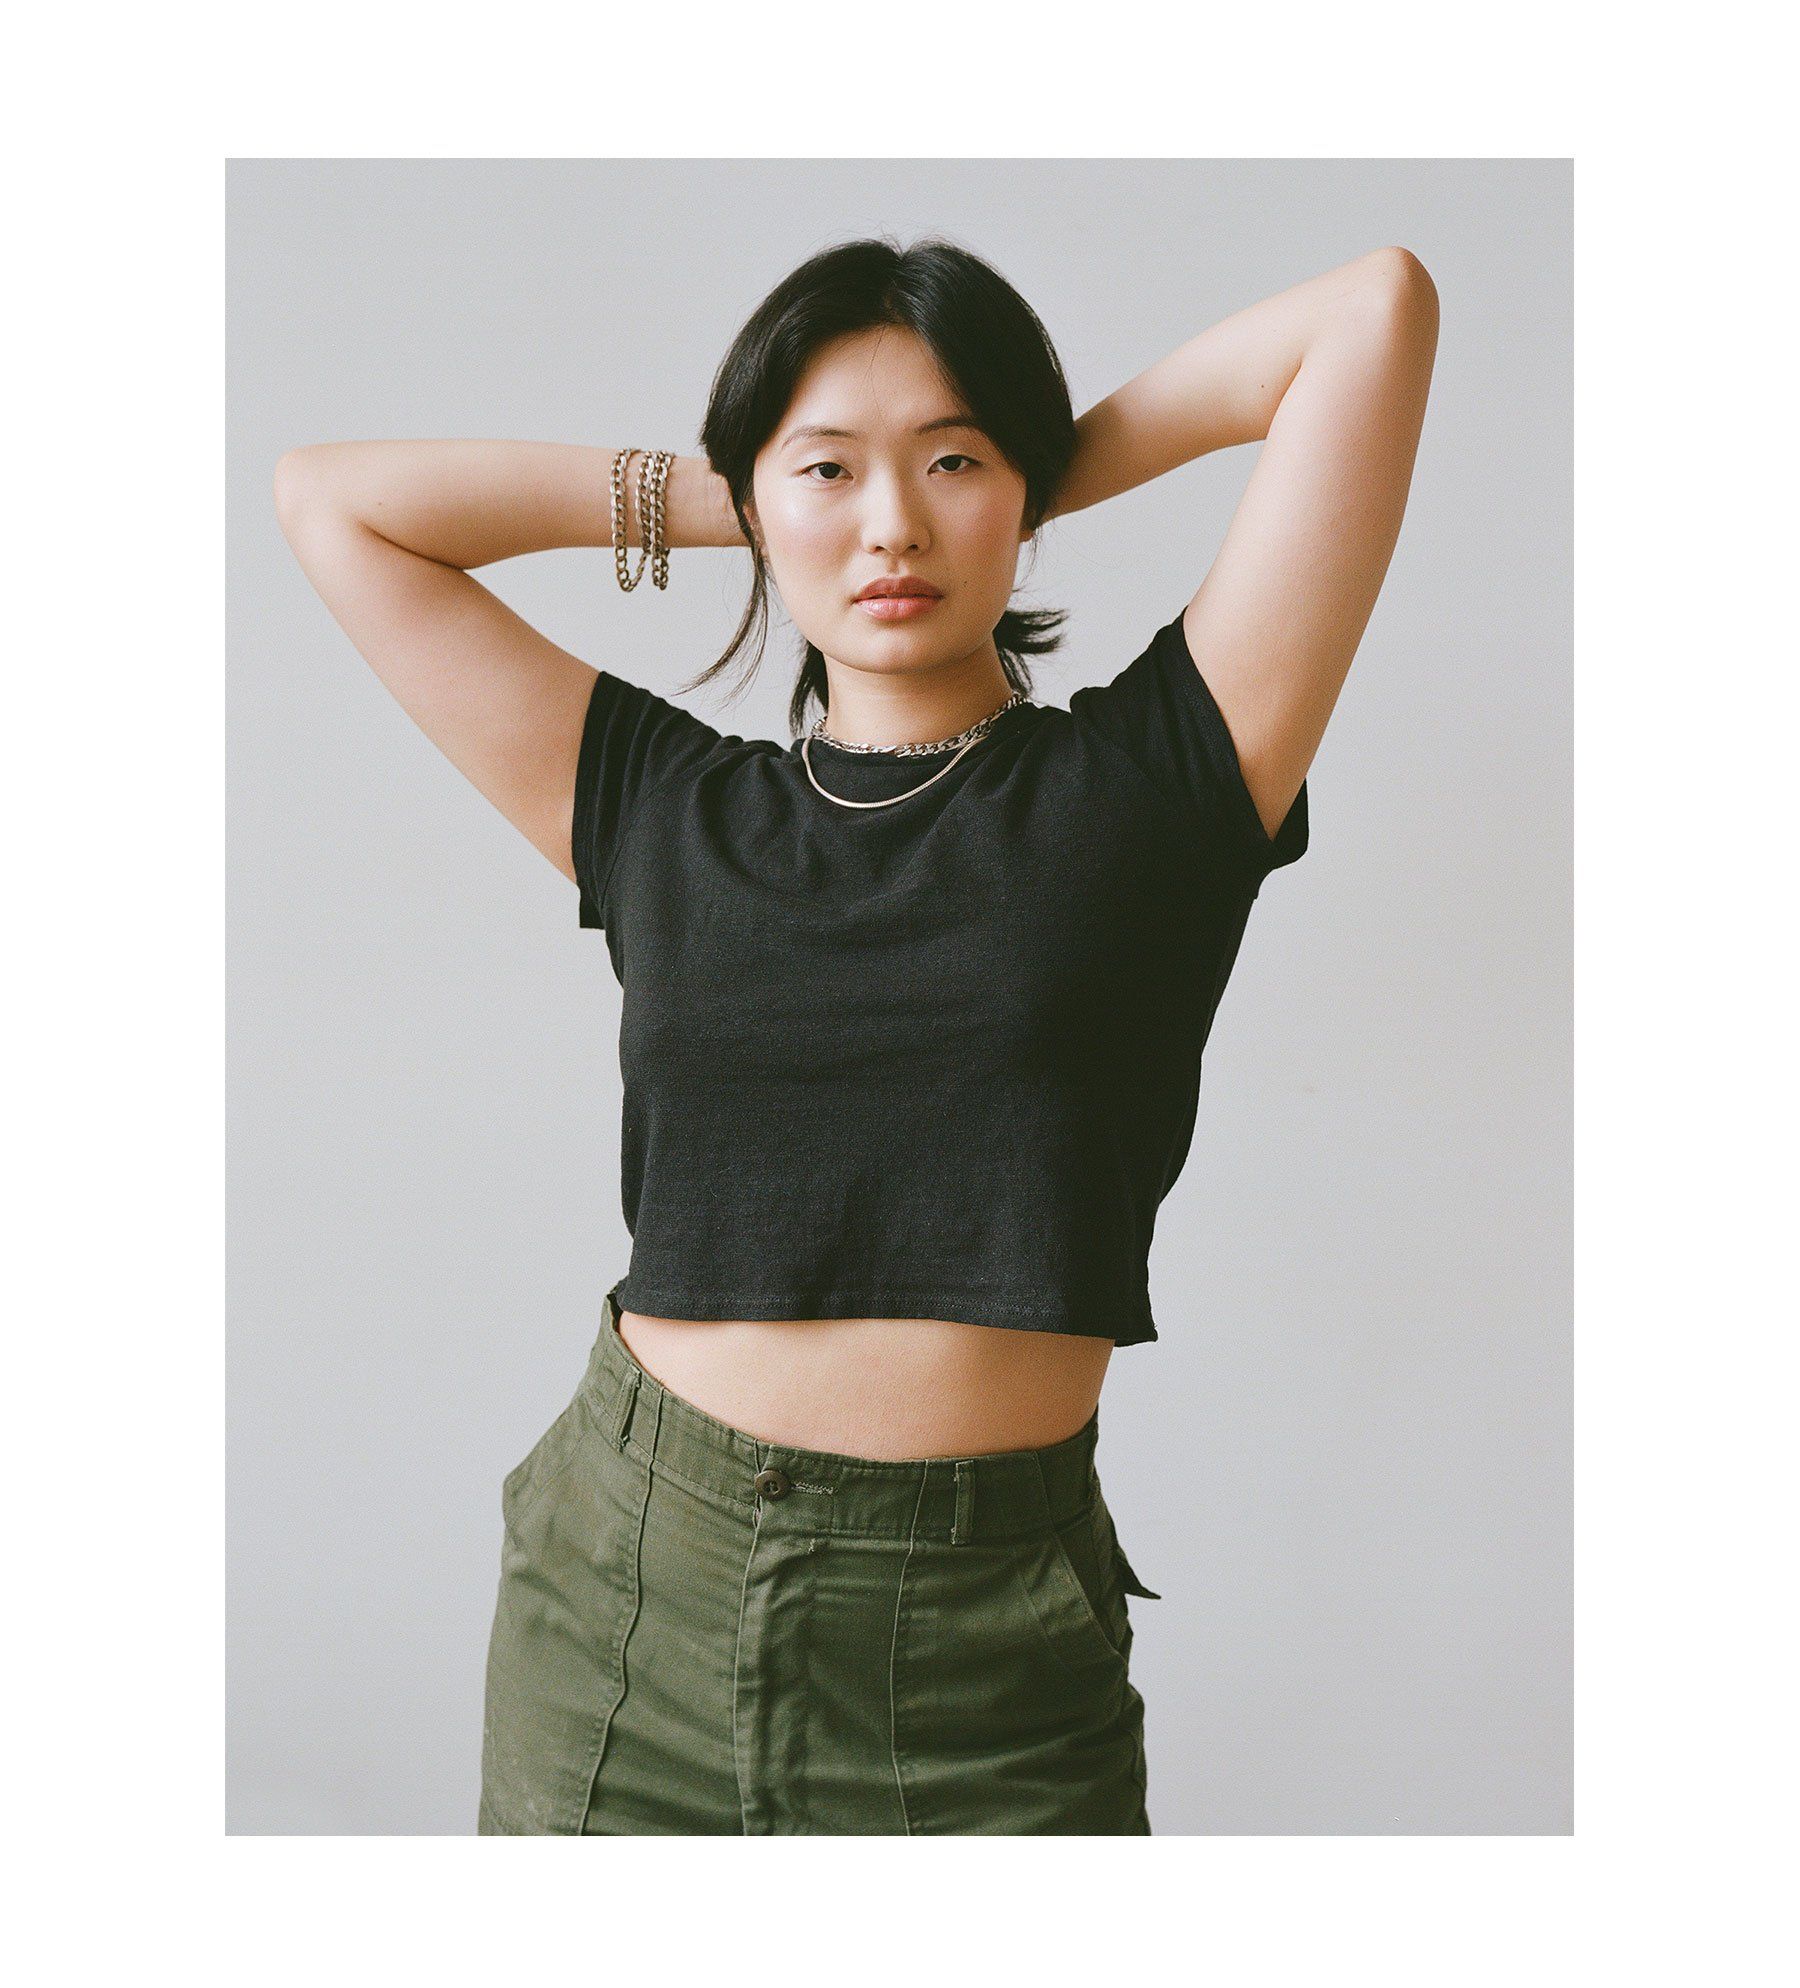 Women's Tops, Crop Tops, T-shirts + More, Urban Outfitters